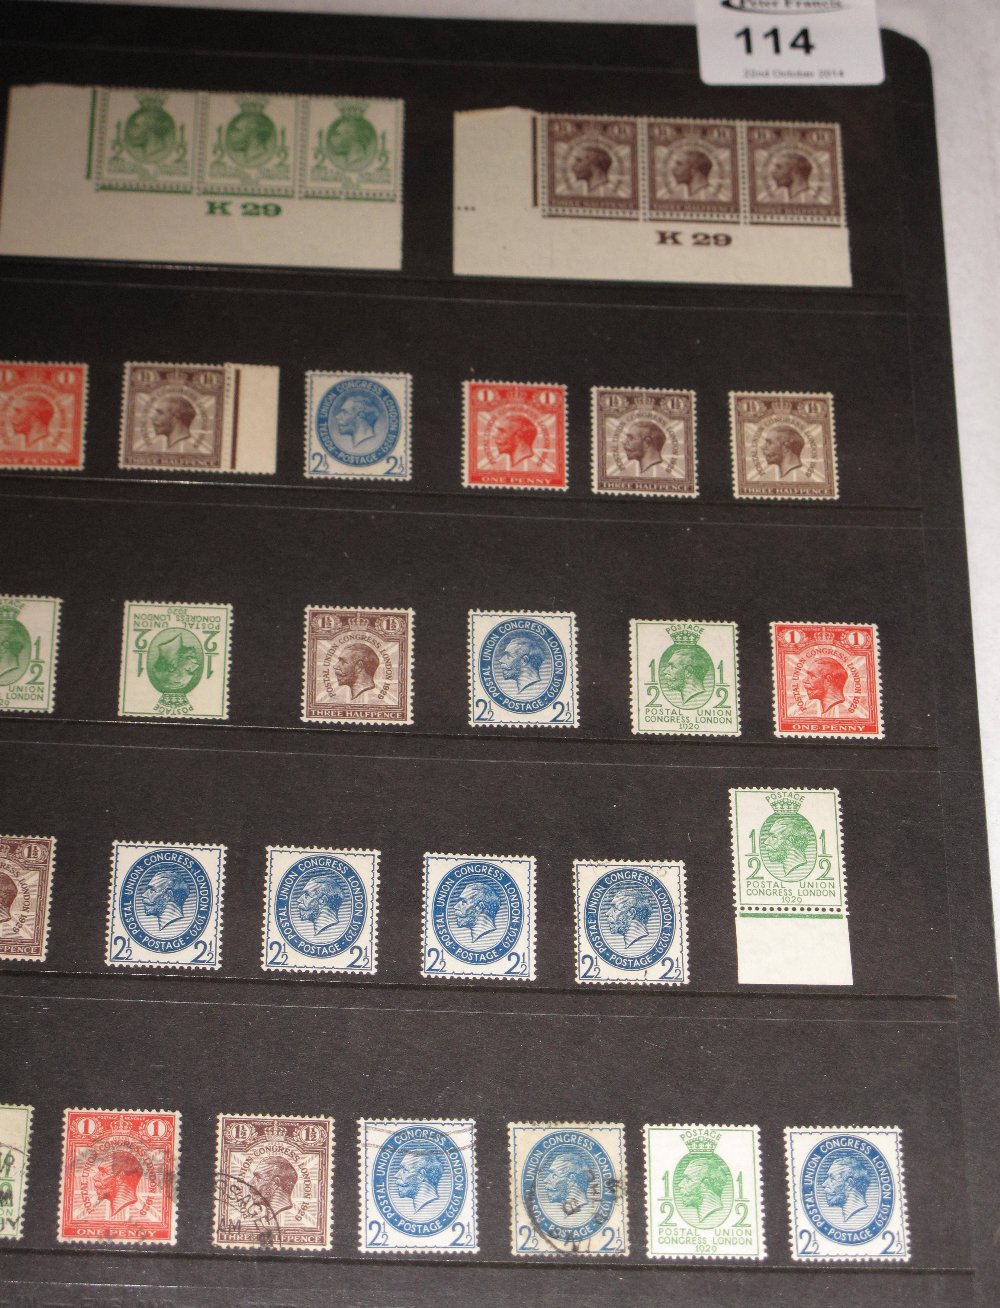 Great Britain King George V 1929 puc 1/2d - 2 1/2d mint and used selection on two pages. 65 stamps